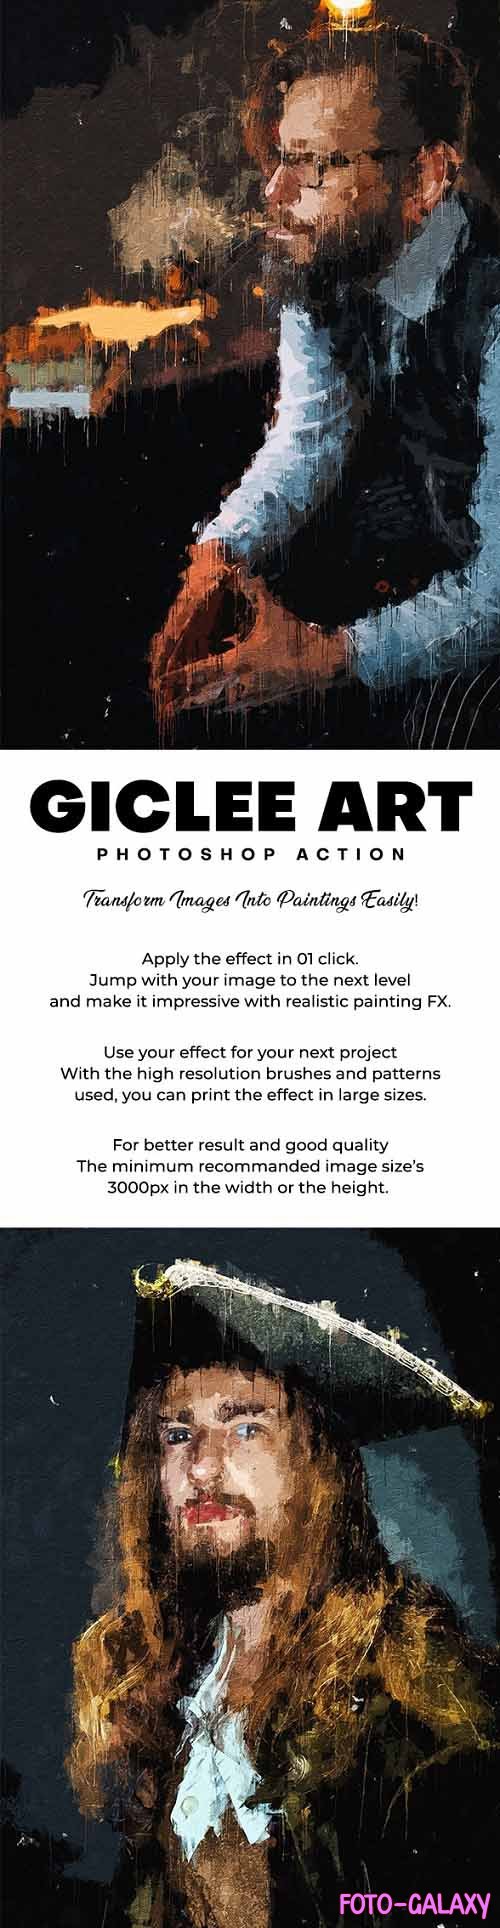 GraphicRiver - Giclee Art - Realistic Painting Photoshop Action 29545270